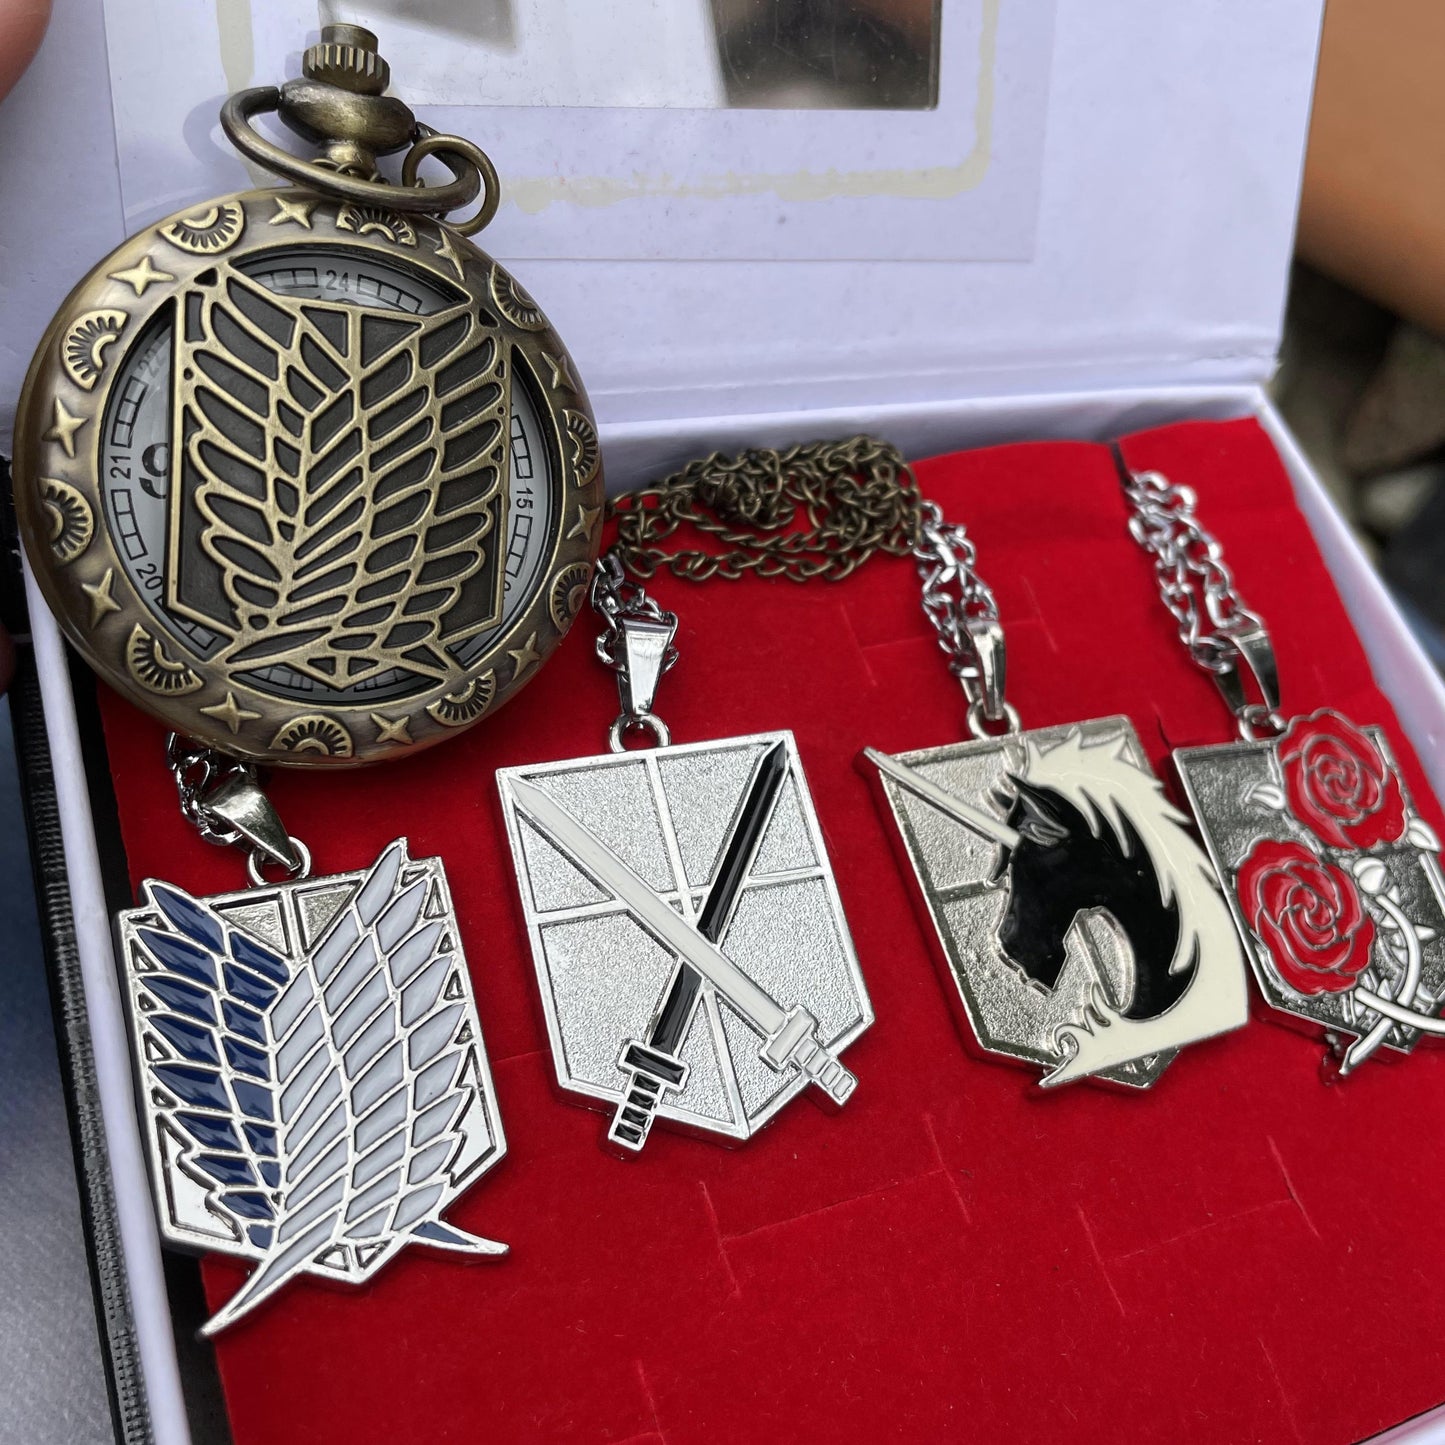 AOT Pocket Watch Brooch Necklace Gift Box